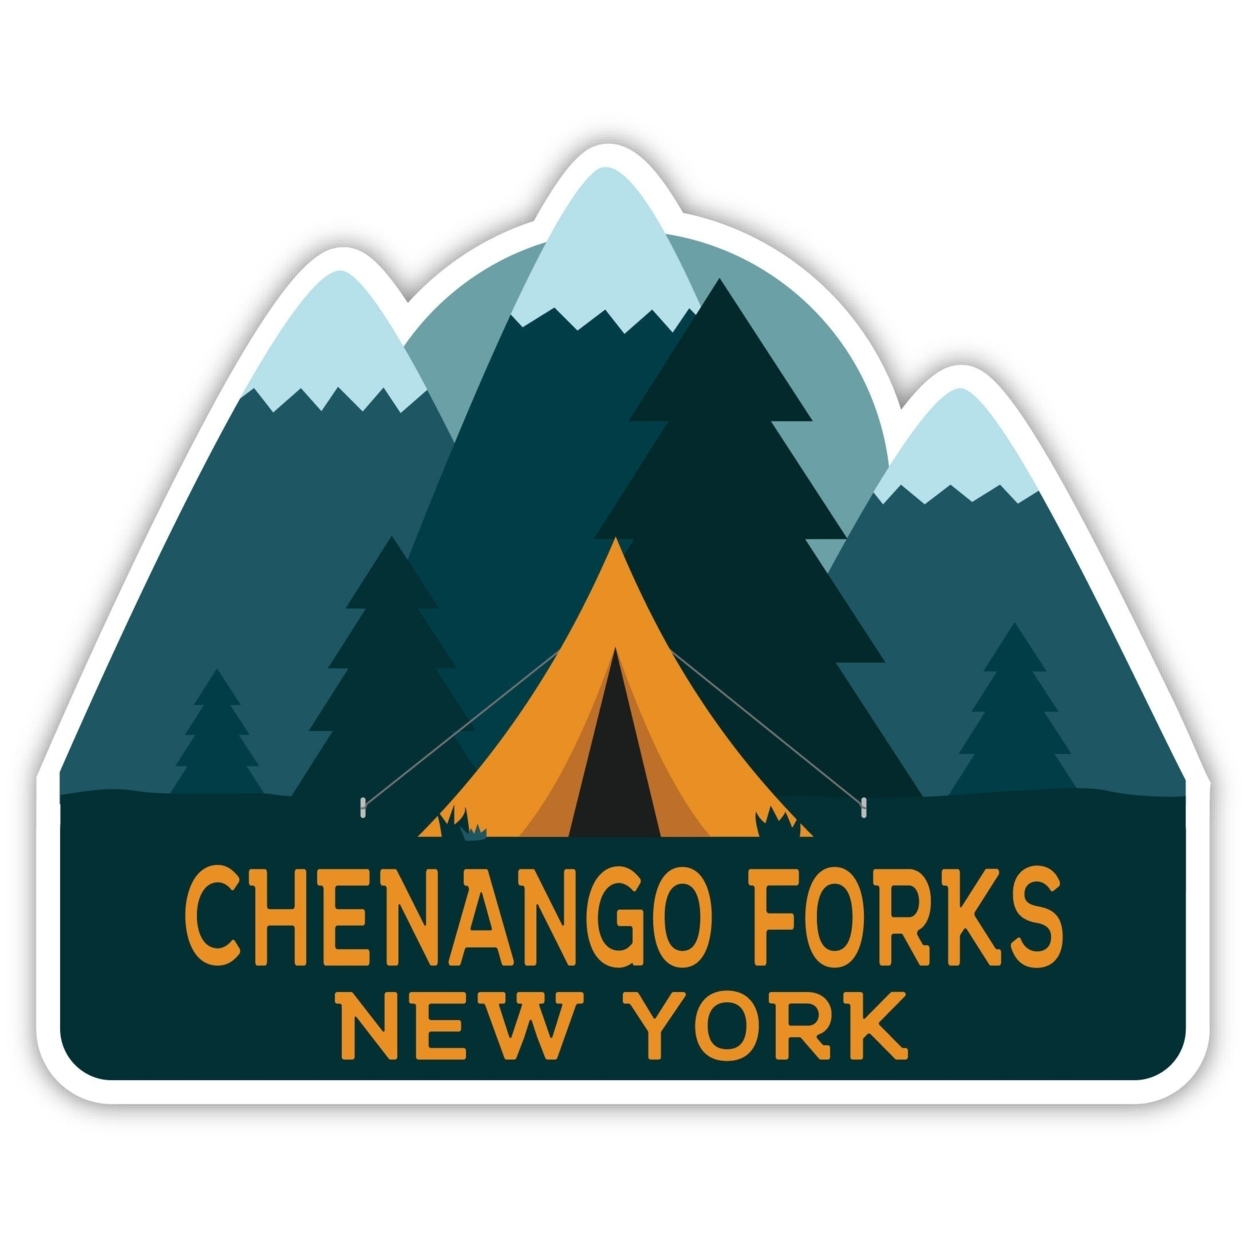 Chenango Forks New York Souvenir Decorative Stickers (Choose Theme And Size) - 4-Pack, 8-Inch, Tent